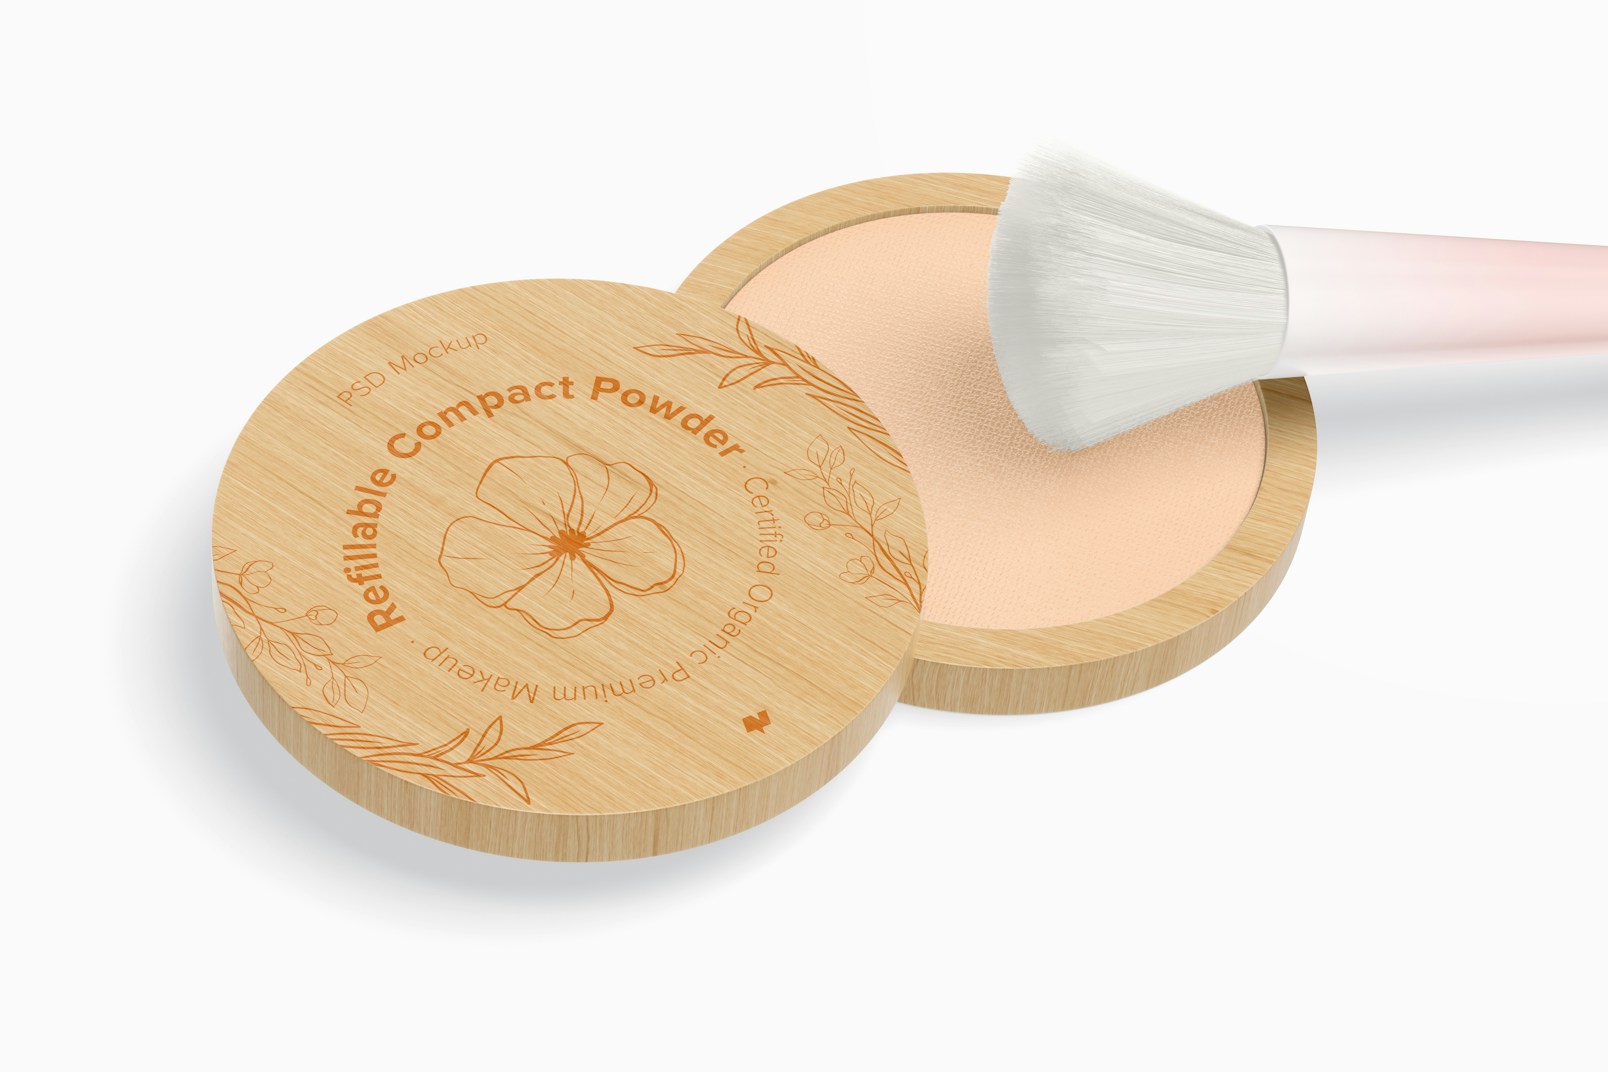 Refillable Compact Powder with Brush Mockup